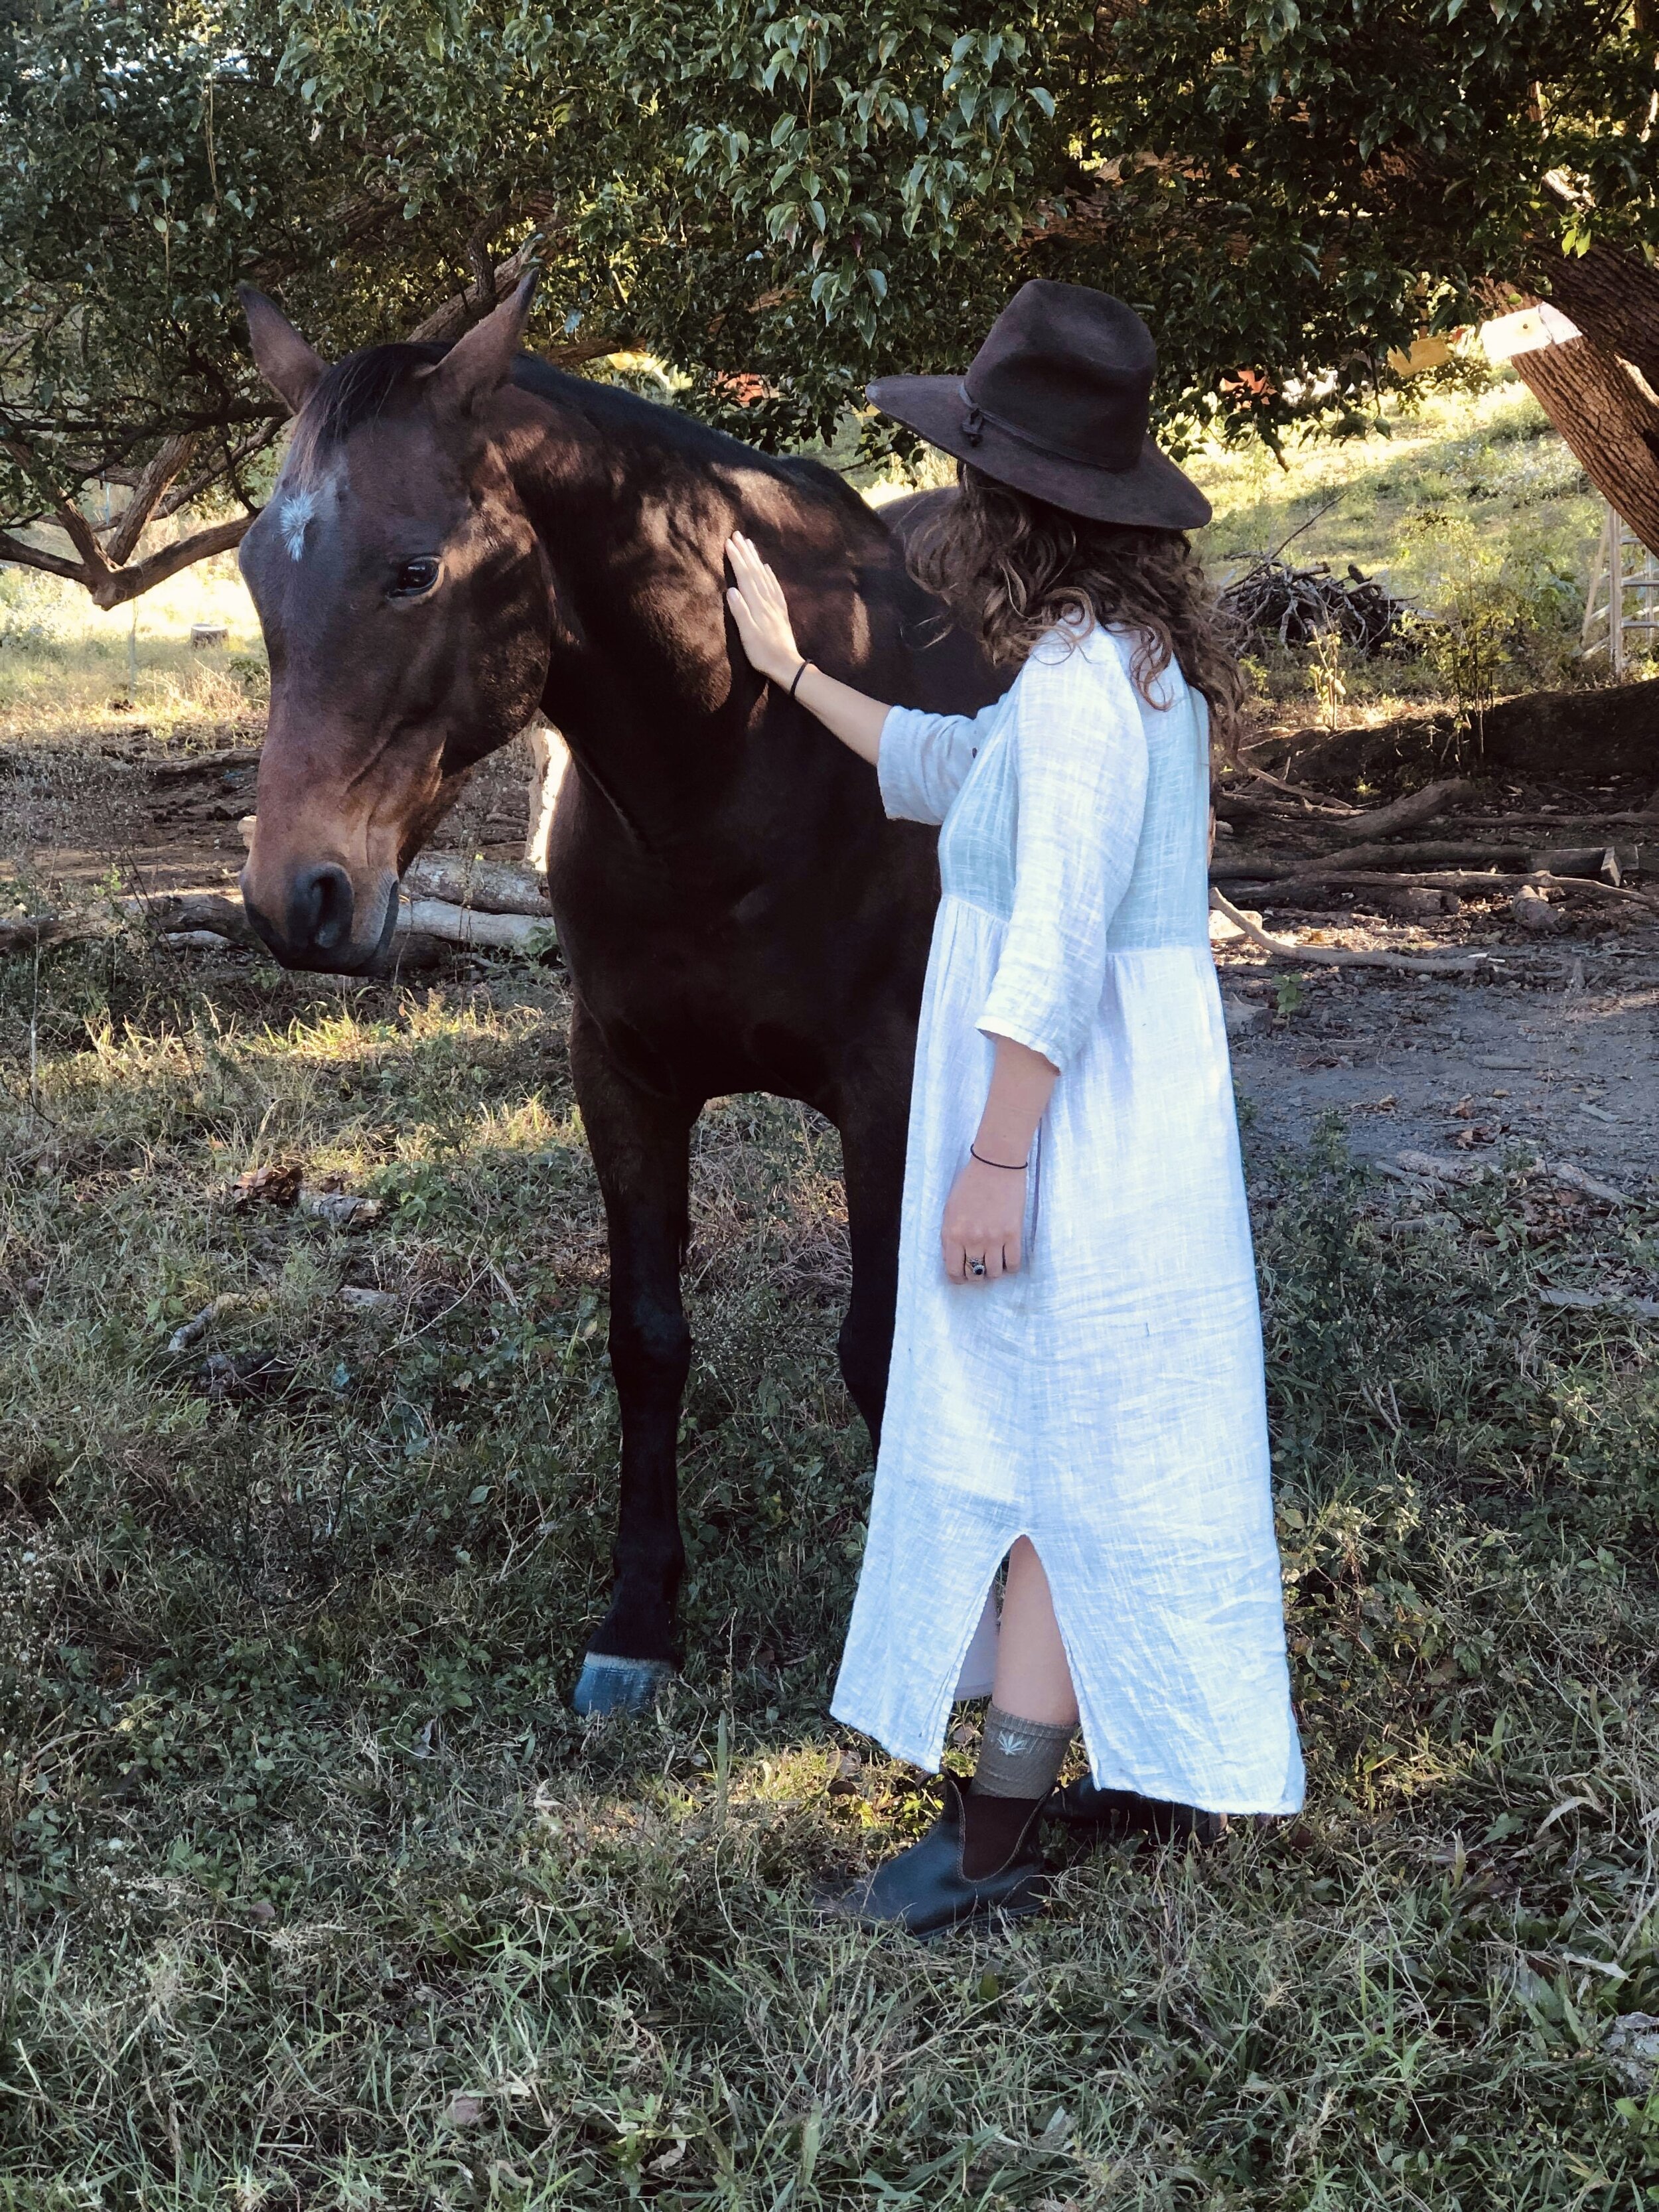 Breathwork meditation cacao ceremony mindfulness Love Connection loving kindness woman’s circle sacred sisters one with nature conscious Connections horse lover nature lover  4432.jpg